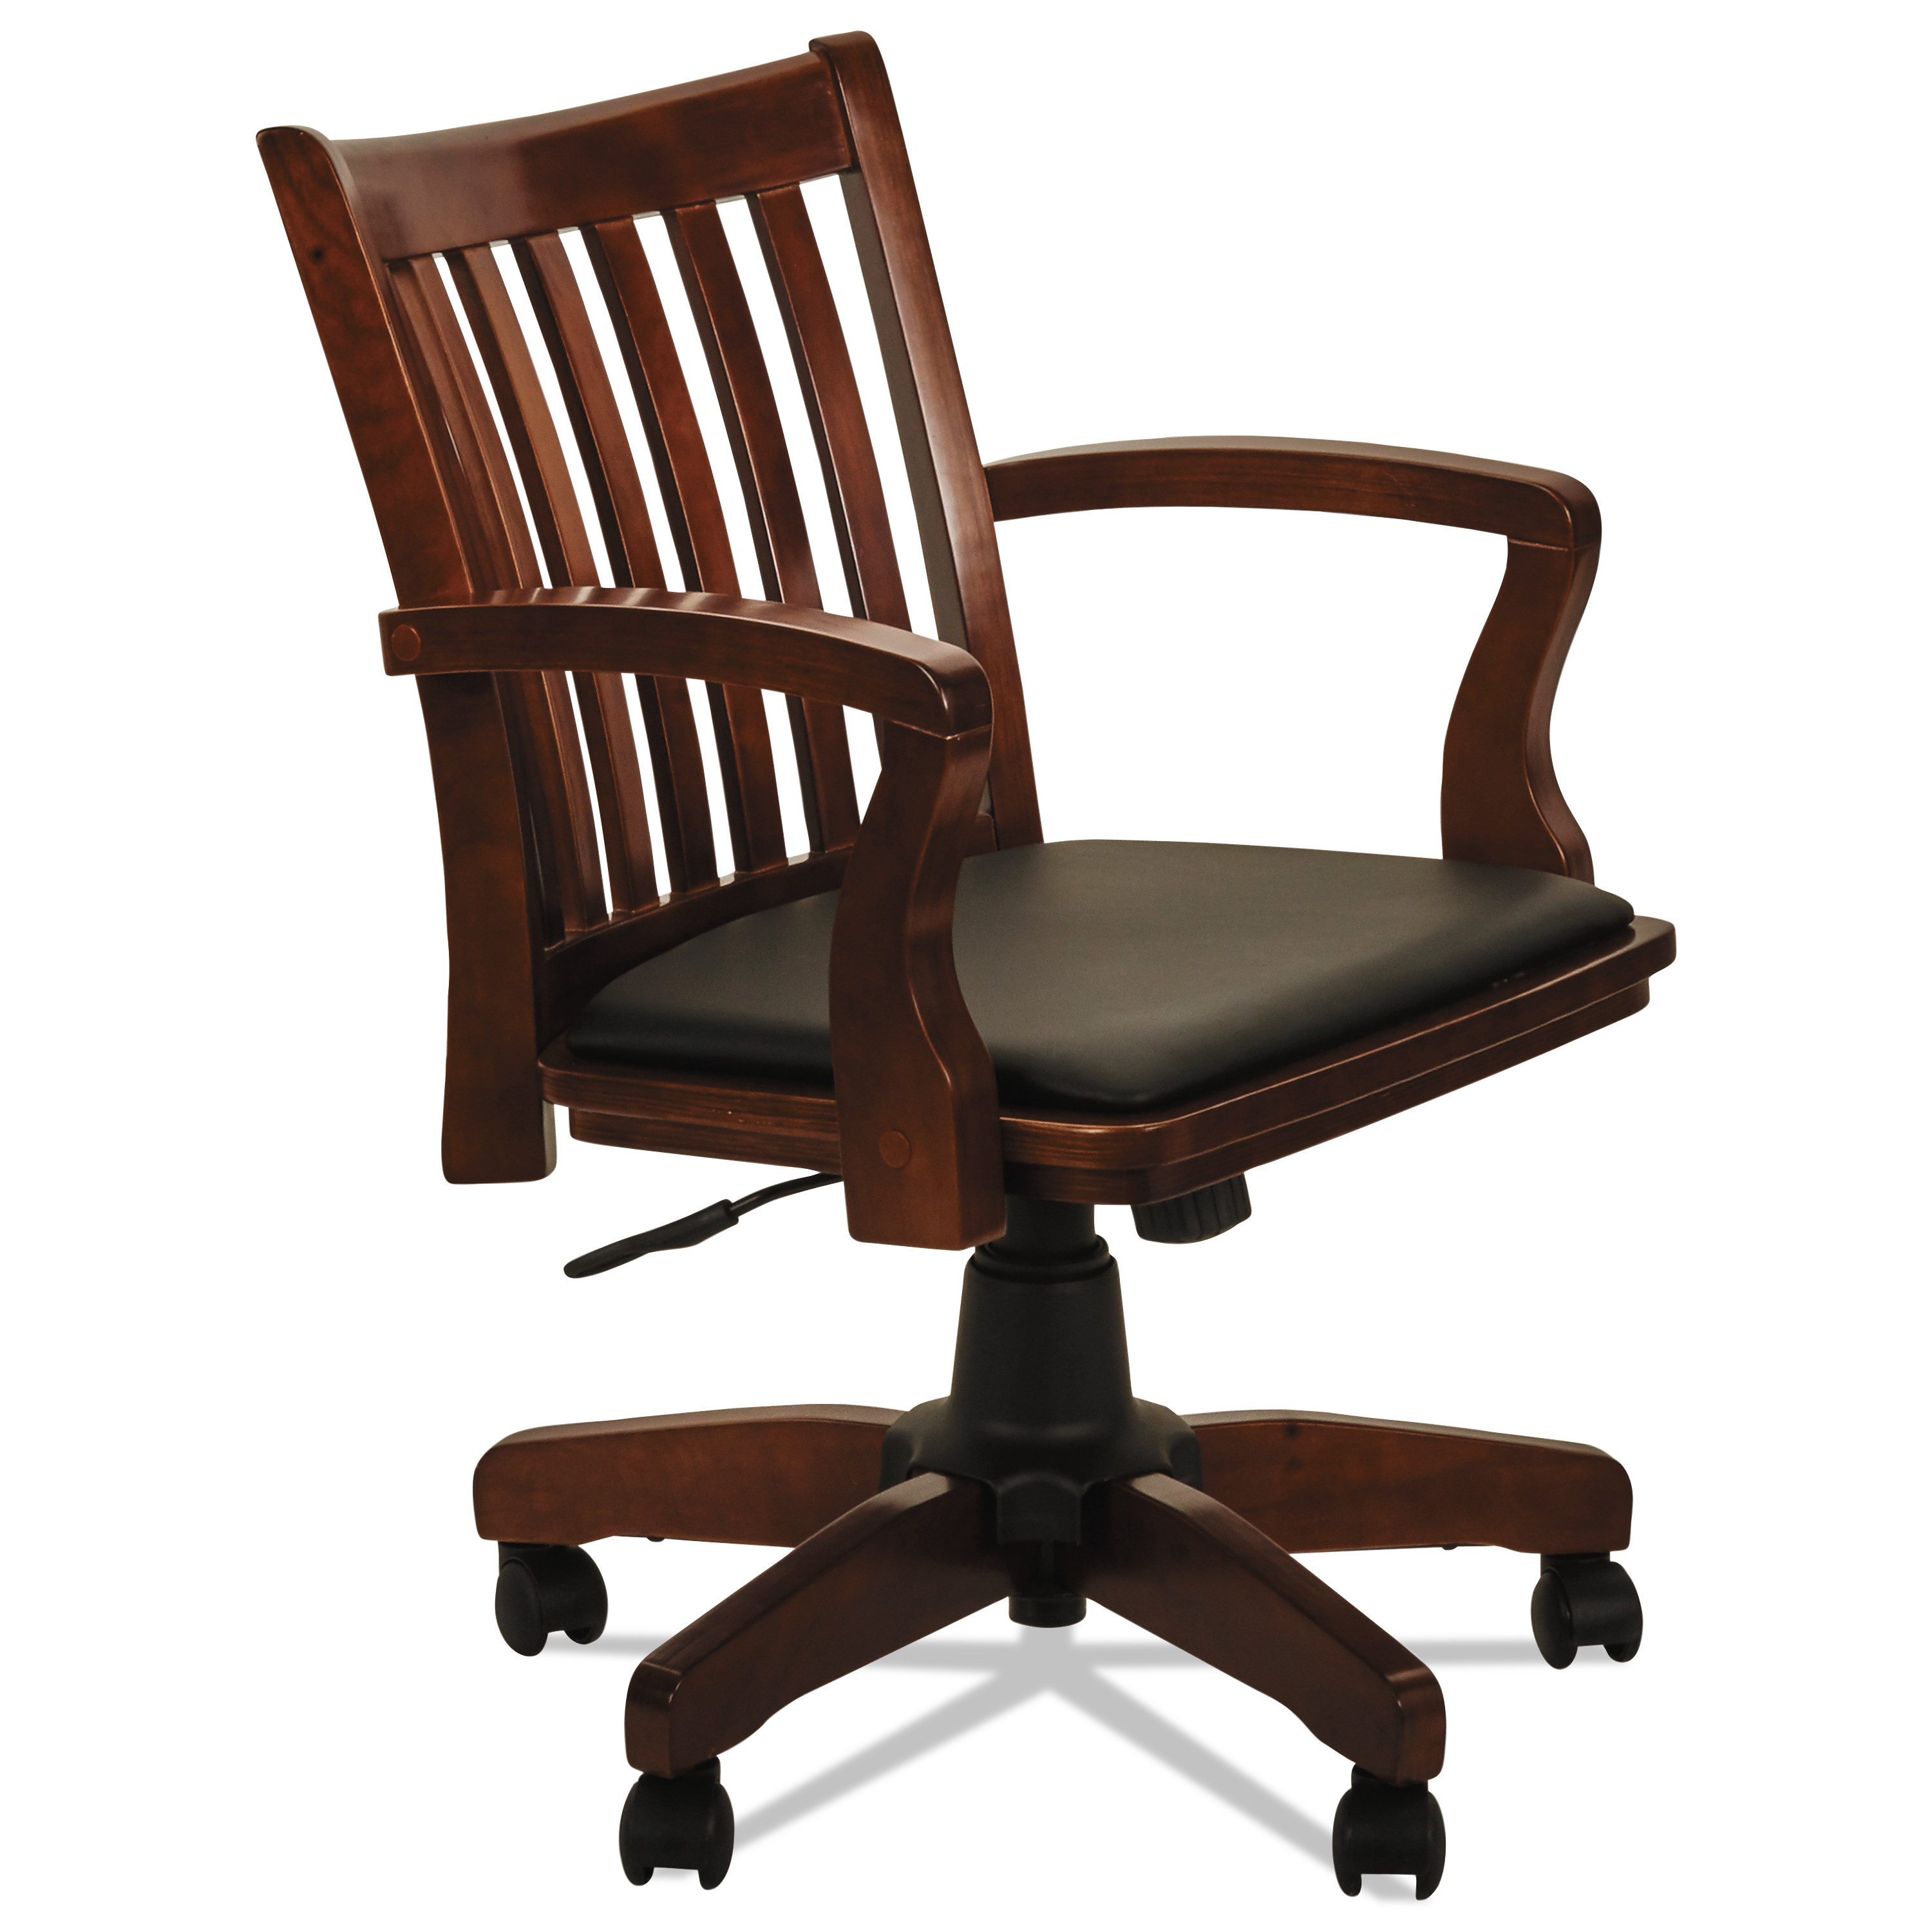  Alera ALEPC4299C Alera Postal Series Slat-Back Wood/Leather Chair, Supports up to 275 lbs., Cherry Seat/Black Back, Cherry Base (ALEPC4299C) 